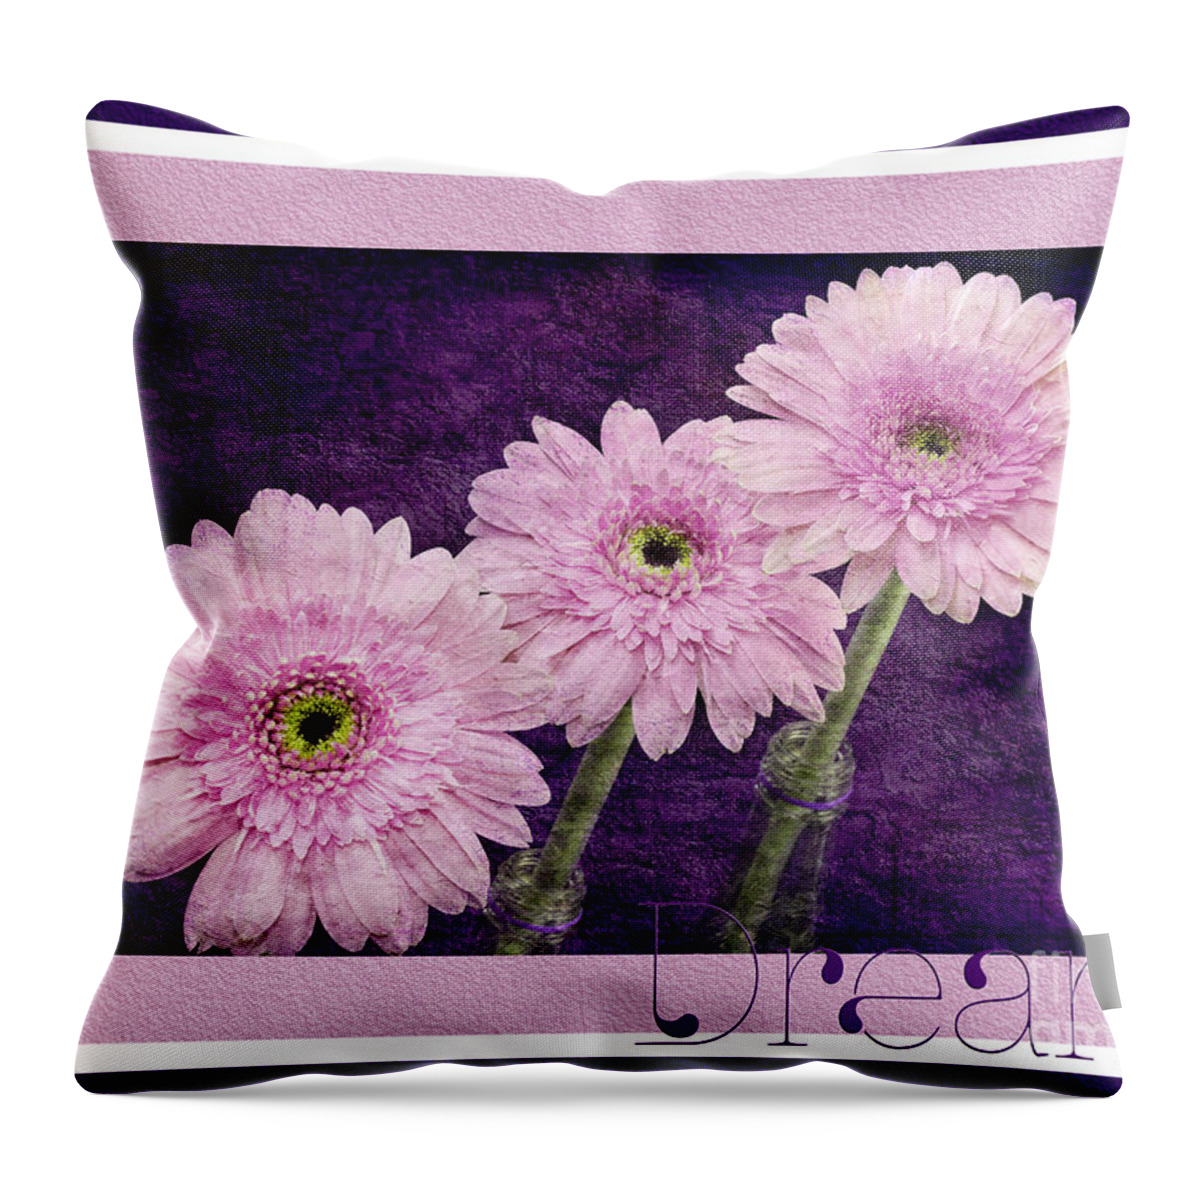 Gerber Throw Pillow featuring the photograph Gerber Daisy Dream 7 by Andee Design